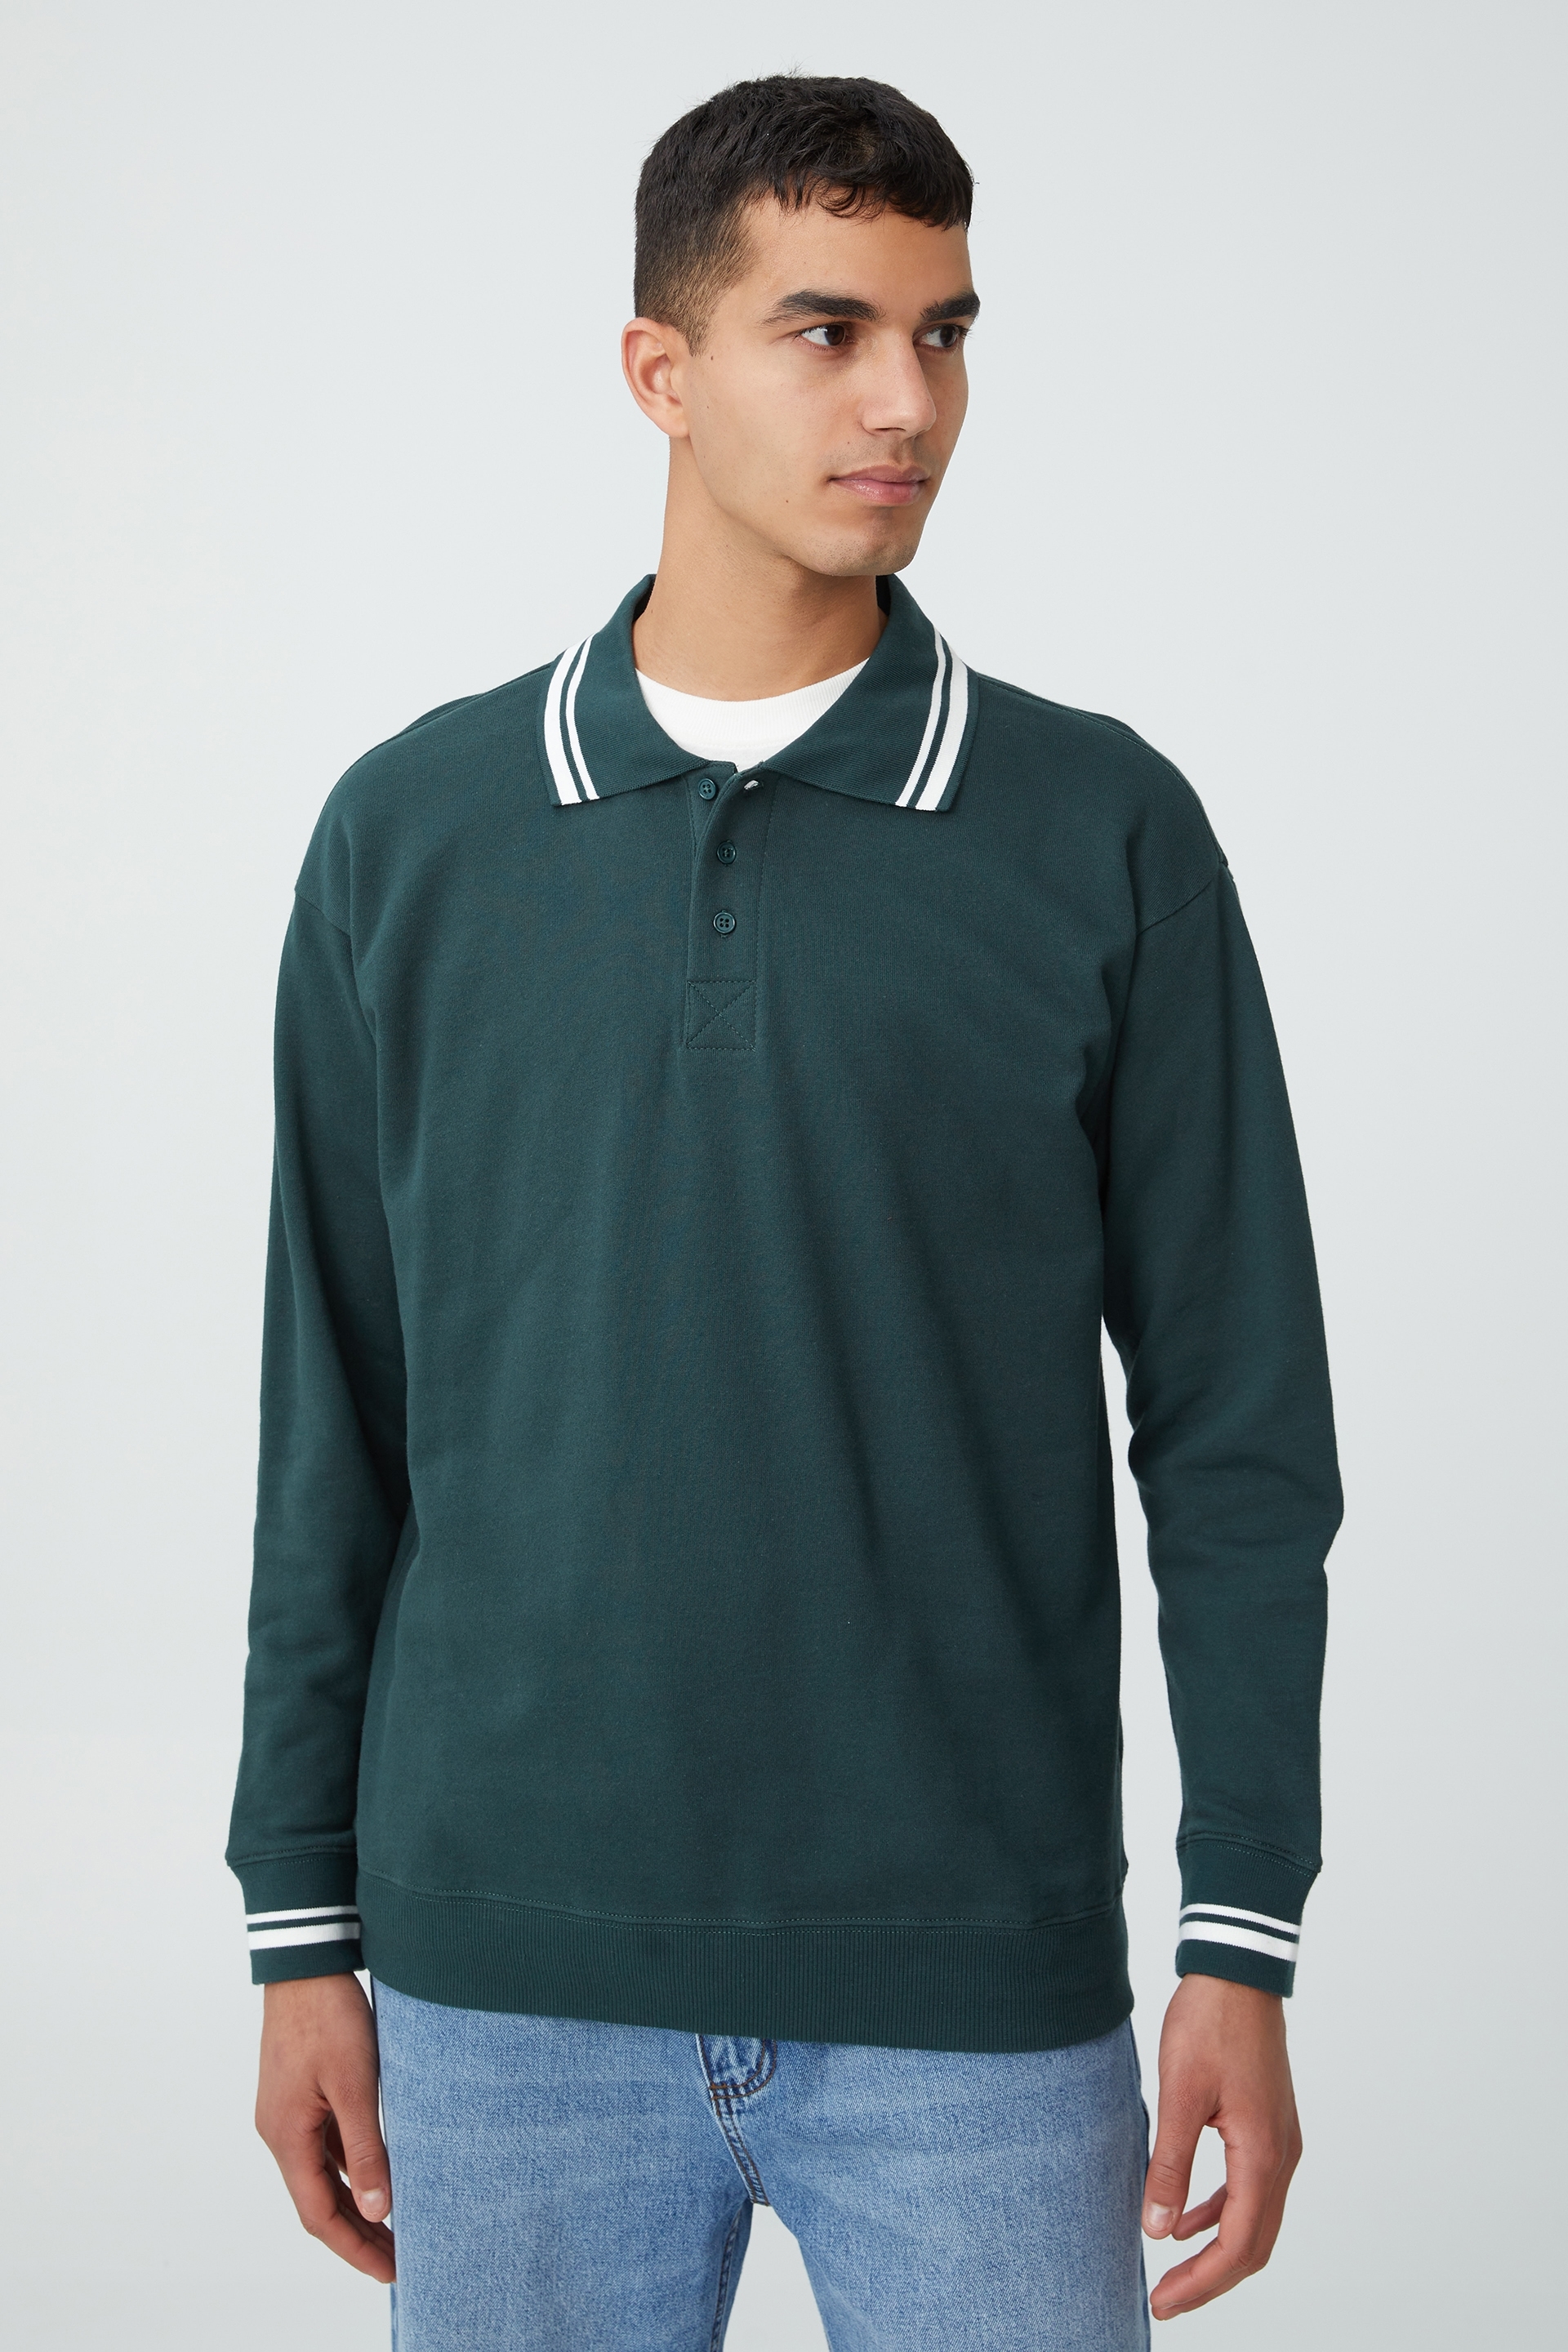 Cotton On Men - Box Fit Rugby Fleece - Pineneedle green